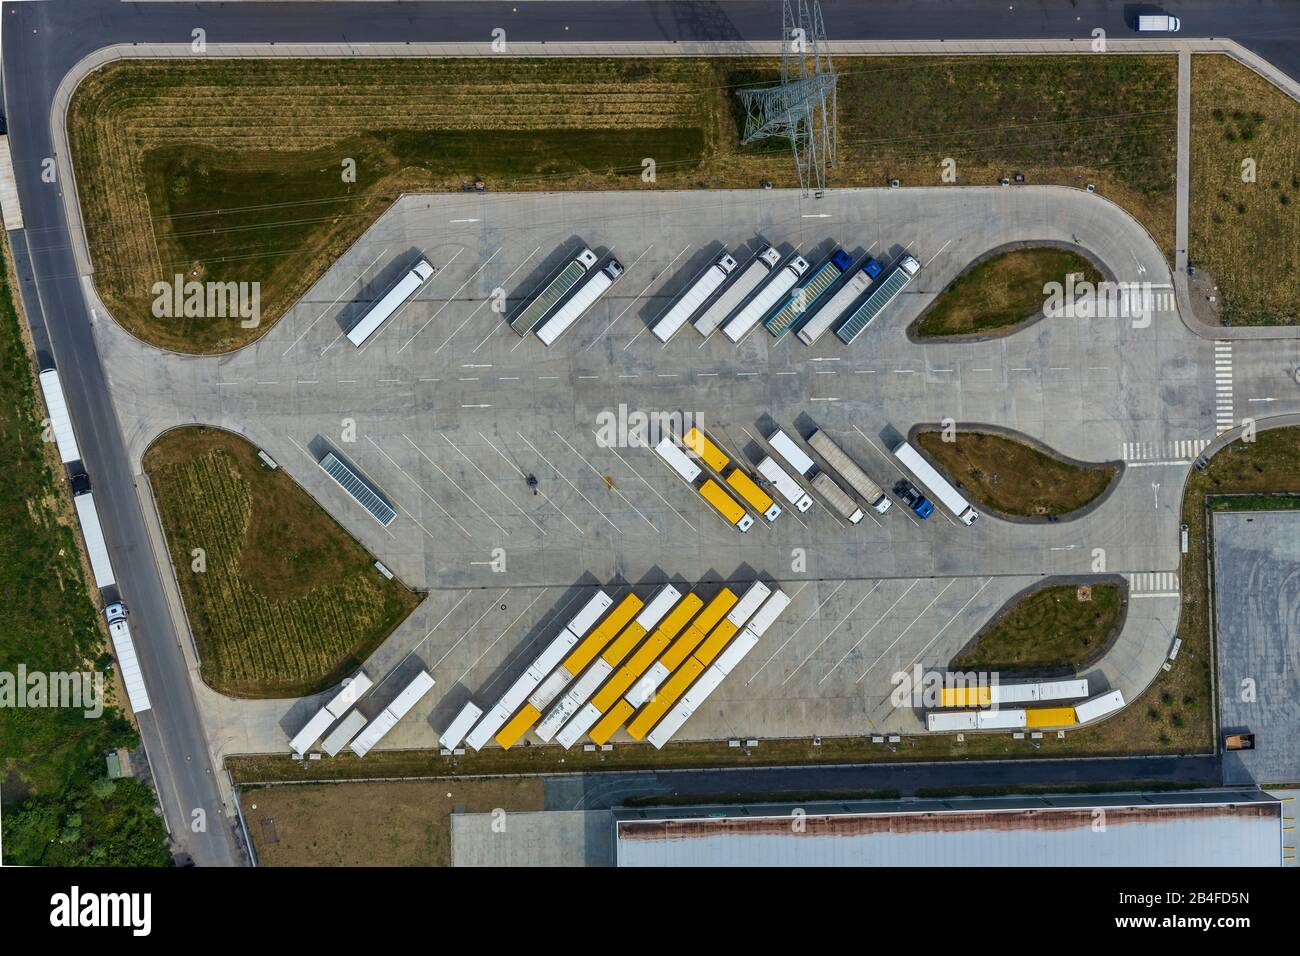 Aerial view of the truck parking lot of the logistics centre Amazon Logistik Werne GmbH - DTM1 in Werne, Ruhr area, North Rhine-Westphalia, Germany Stock Photo